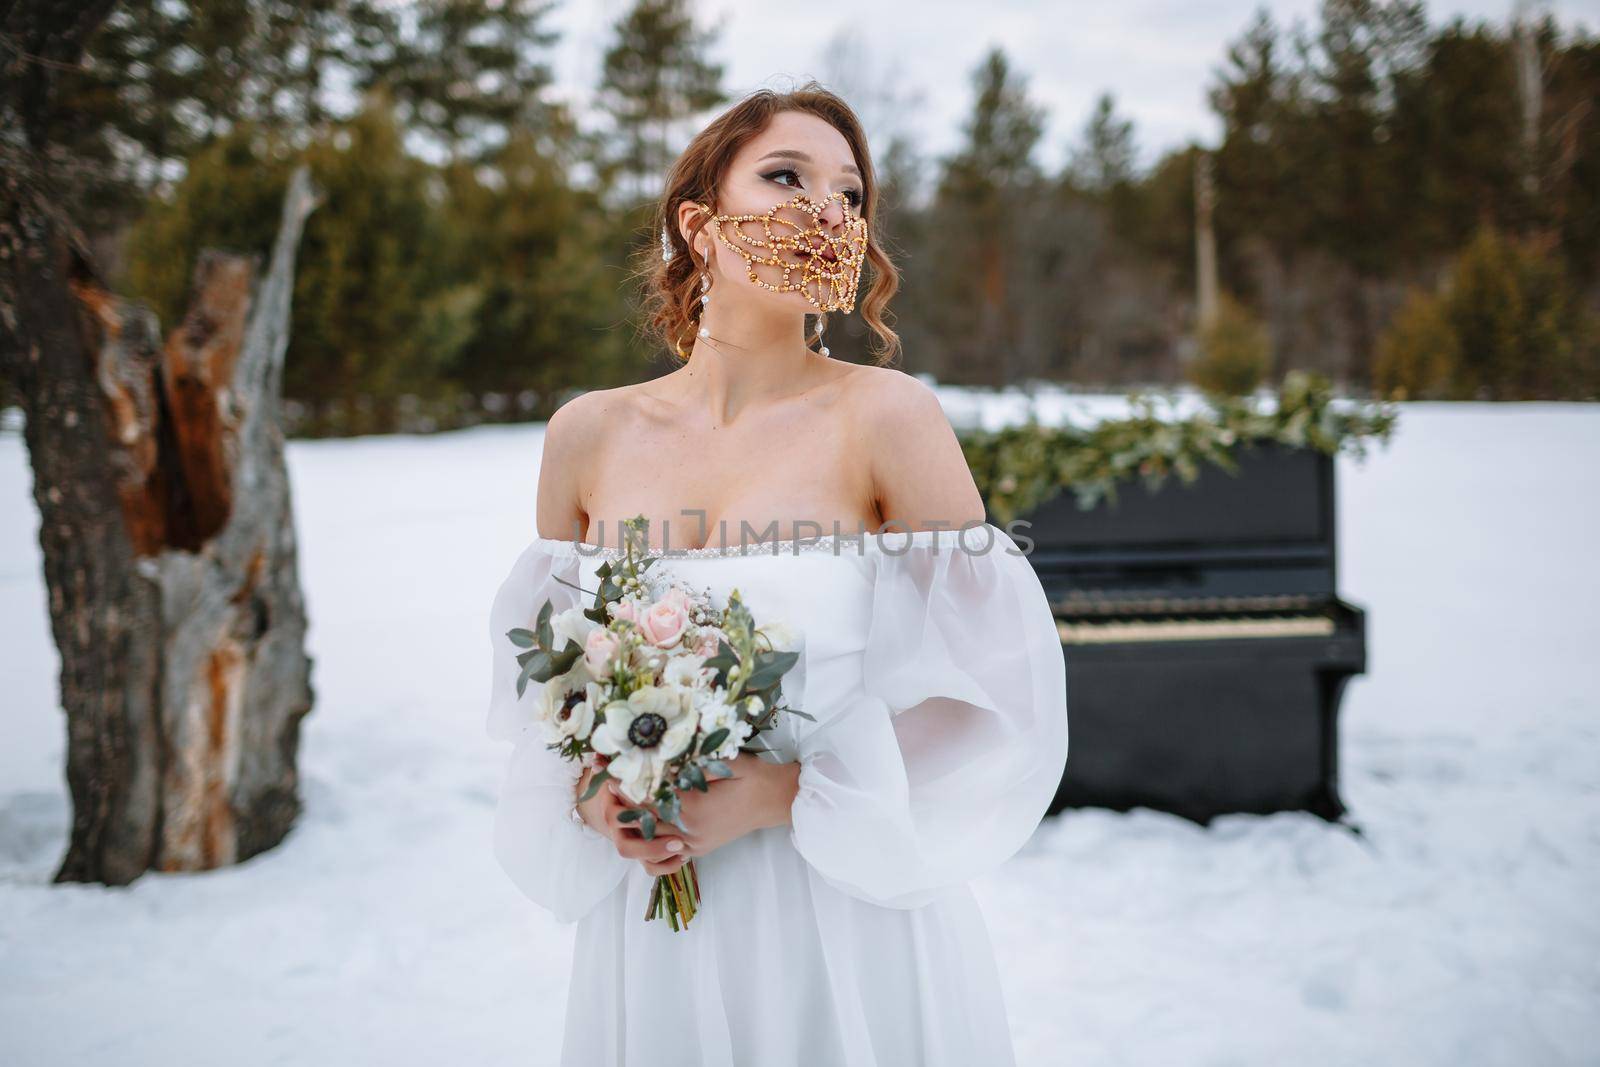 The bride is standing in a snow-covered forest. The bride is wearing a fabulous protective mask.